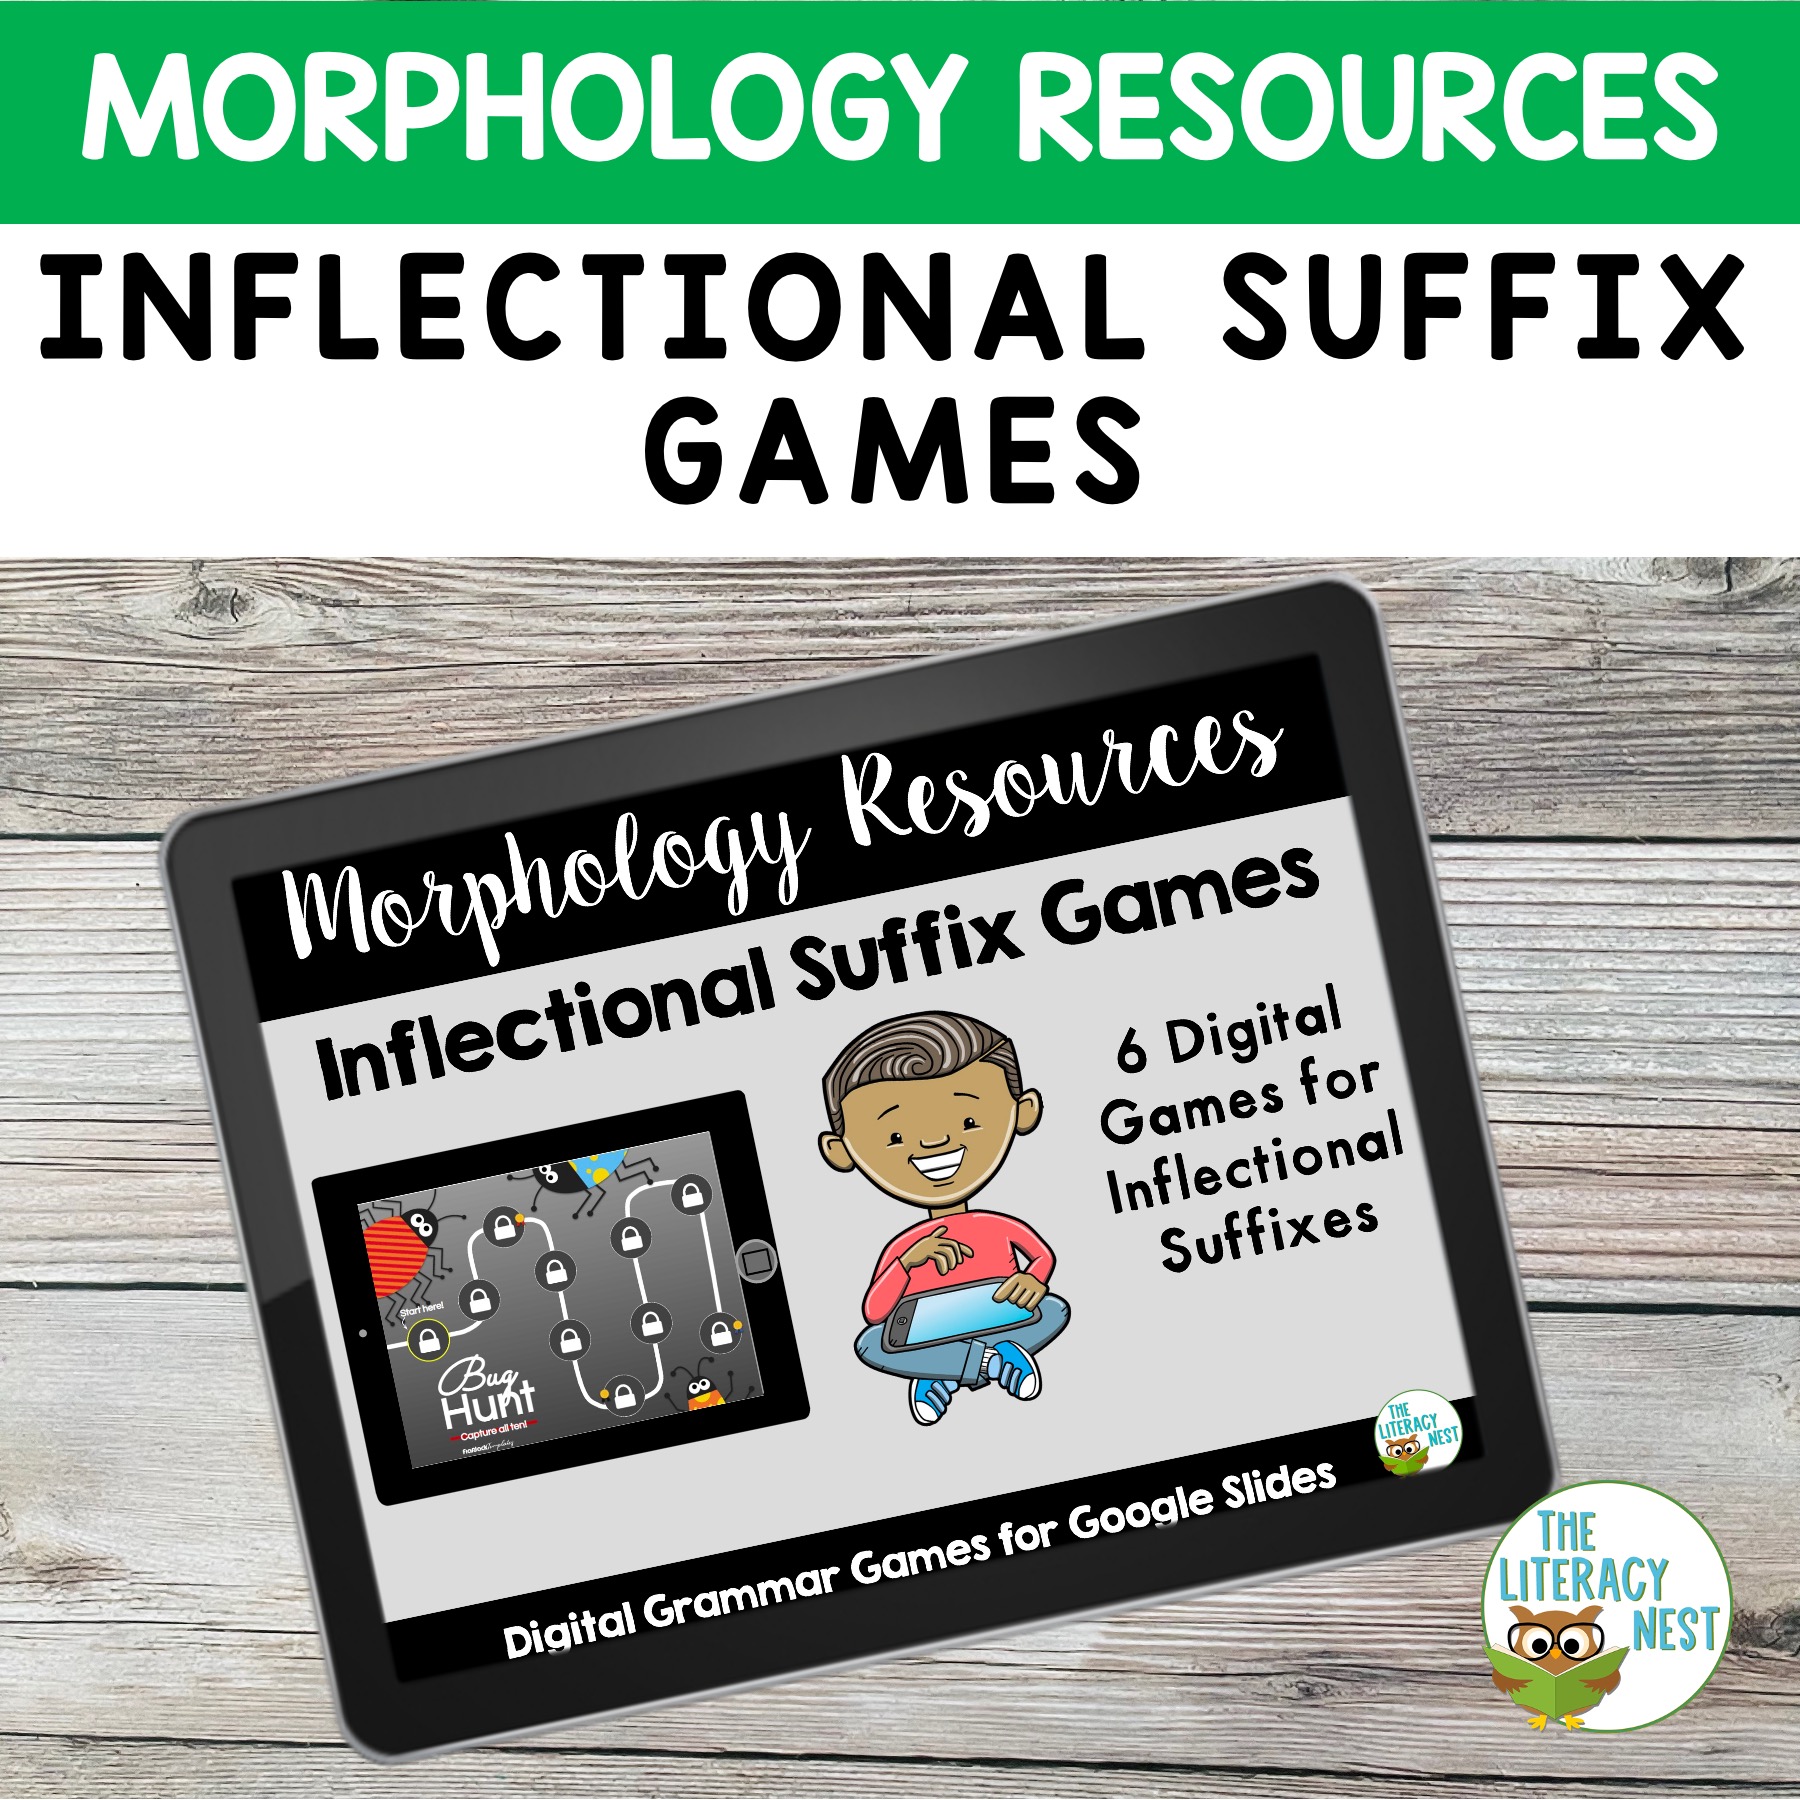 Inflectional　Suffixes　Morphology　Literacy　The　Digital　for　Games　Nest